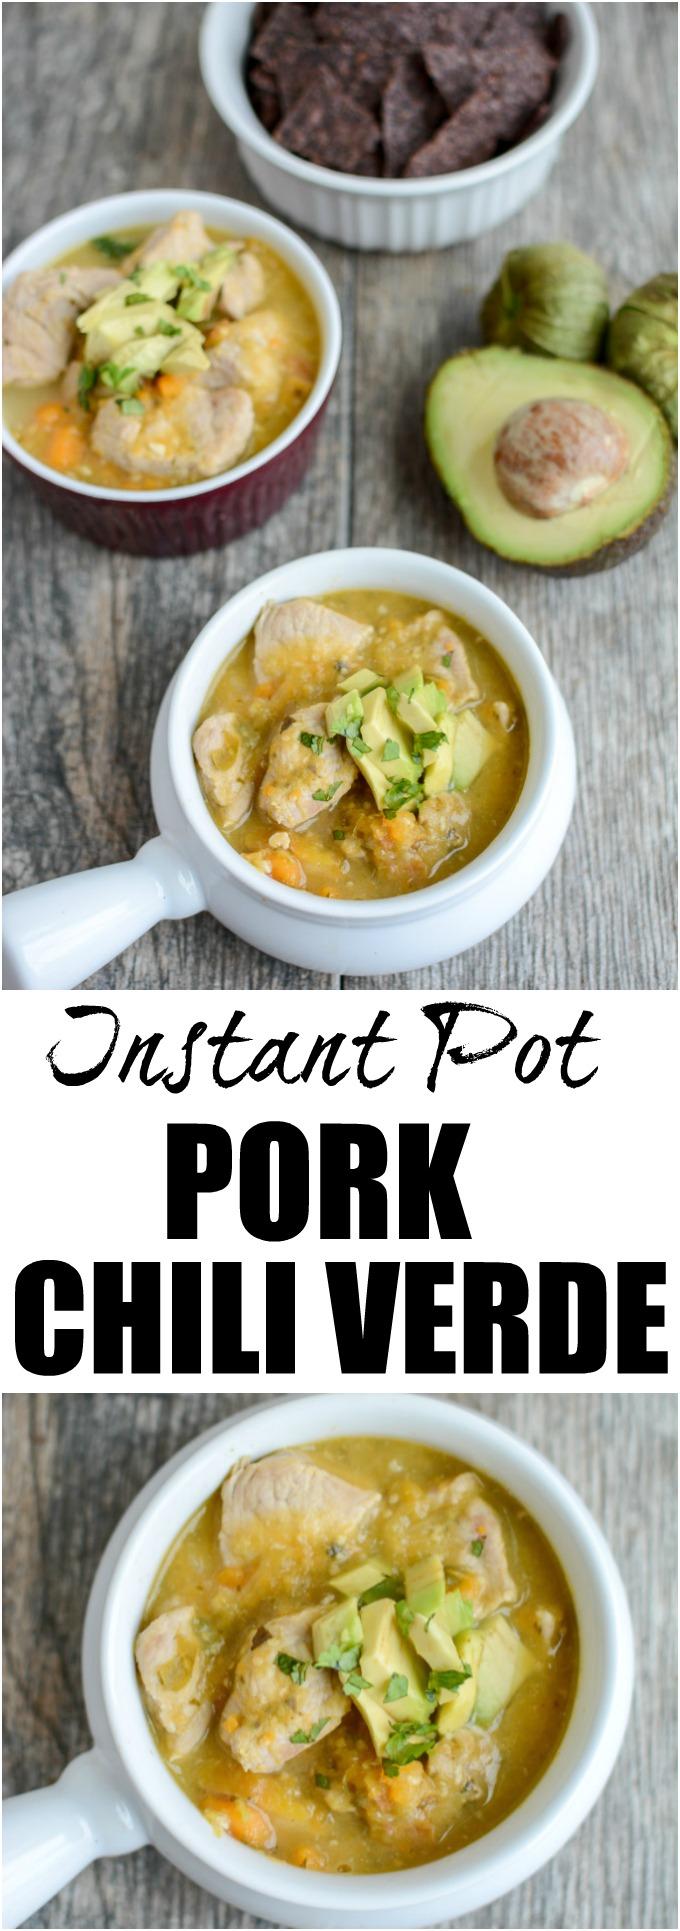 This Instant Pot Pork Chili Verde recipe is a quick, healthy dinner that couldn't be easier! Made with simple ingredients, it's full of flavor and the leftovers make a great lunch!